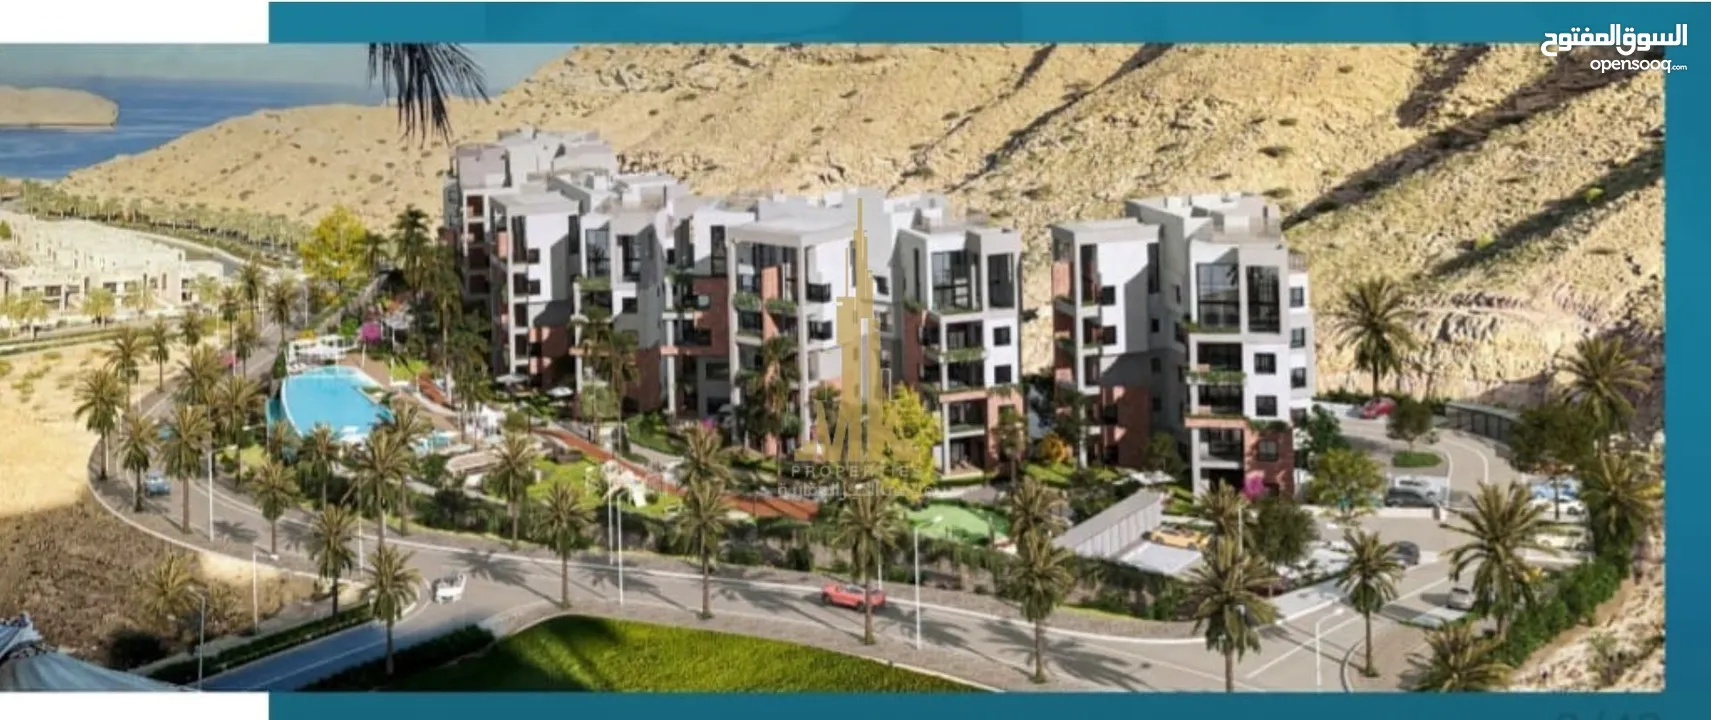 Real estate investment opportunity / freehold / lifetime OMAN residency / installments for 3 years